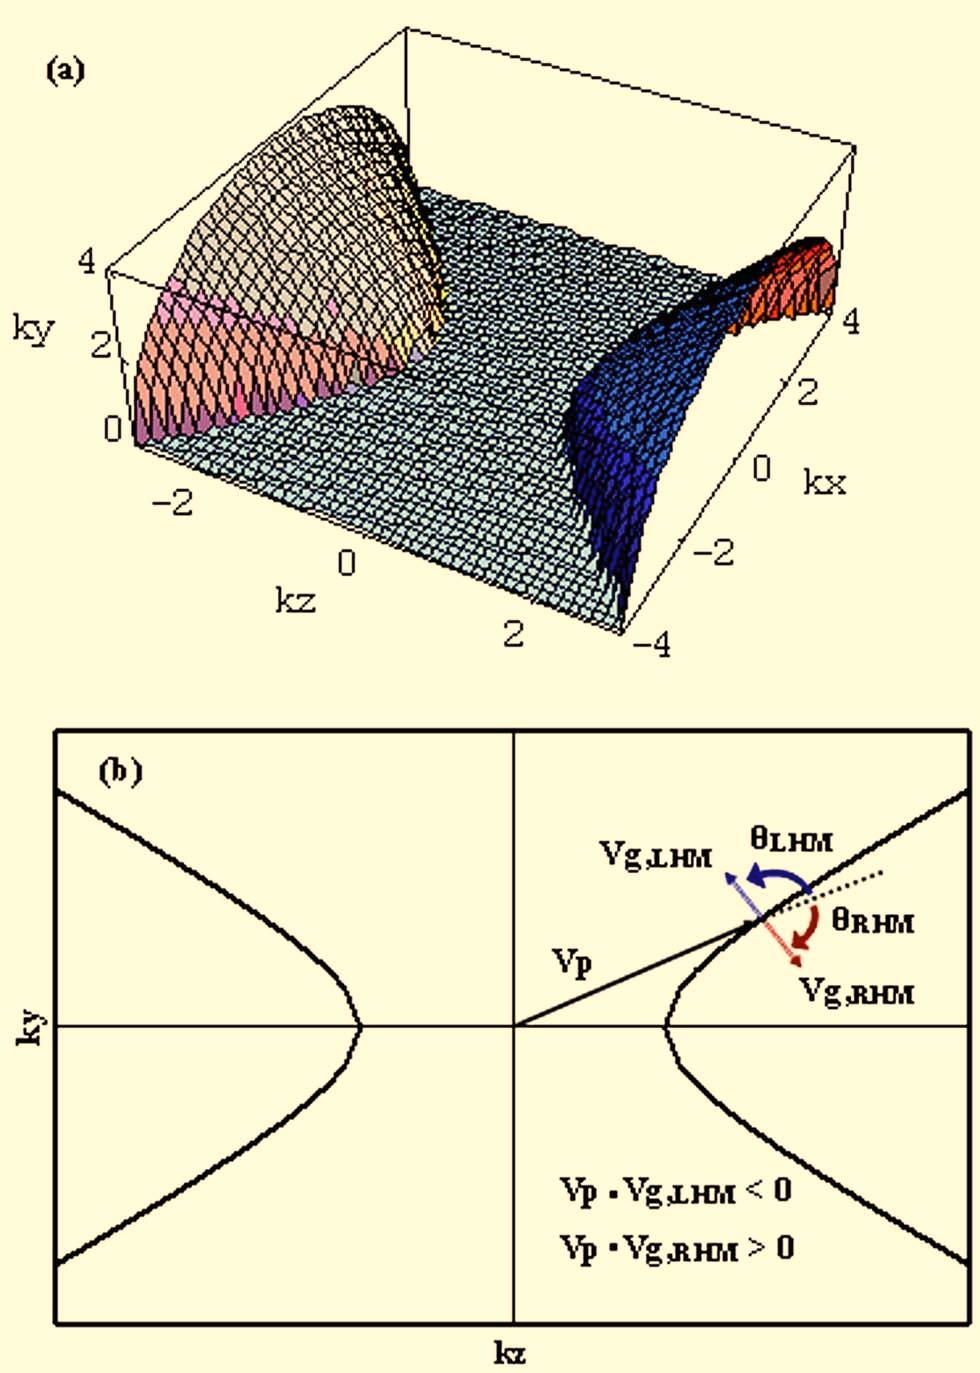 The k-space diagram for the extraordinary wave propagating through a medium with material parameters s =1, z = 2,